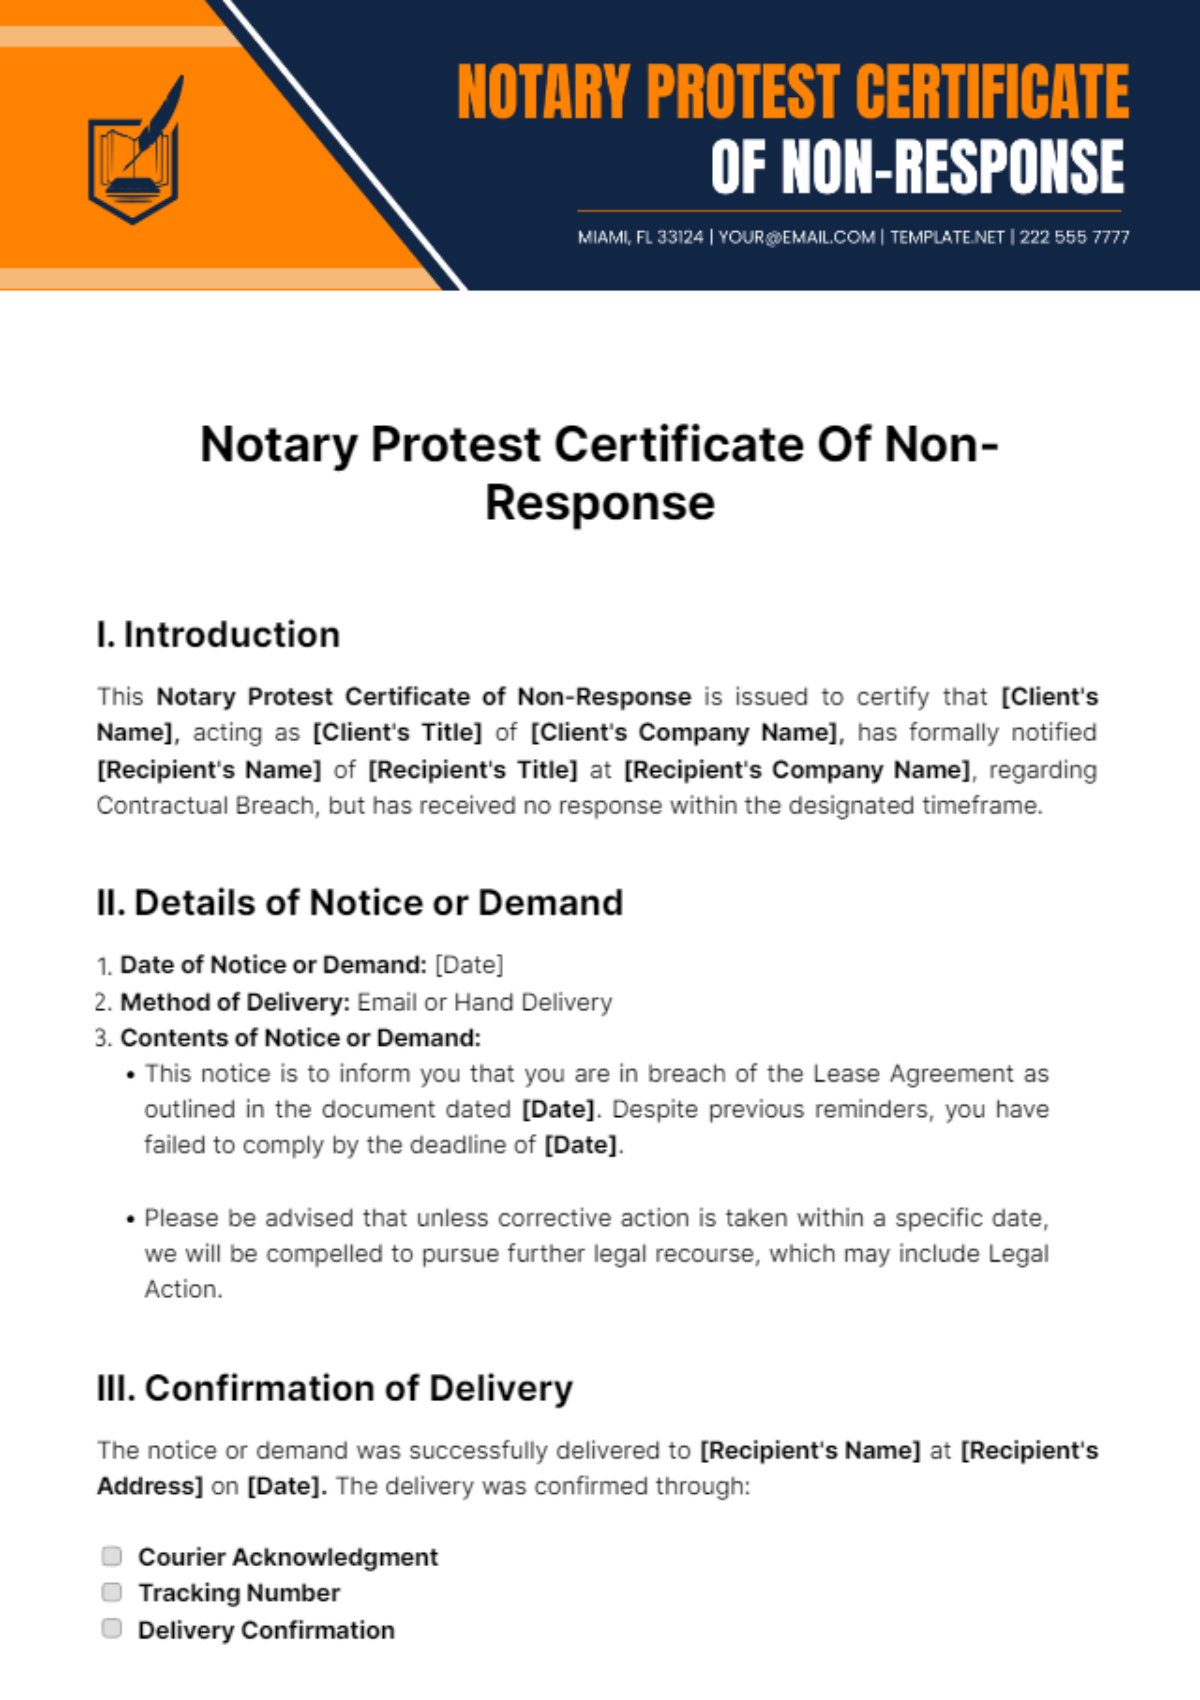 Free Notary Protest Certificate Of Non-Response Template